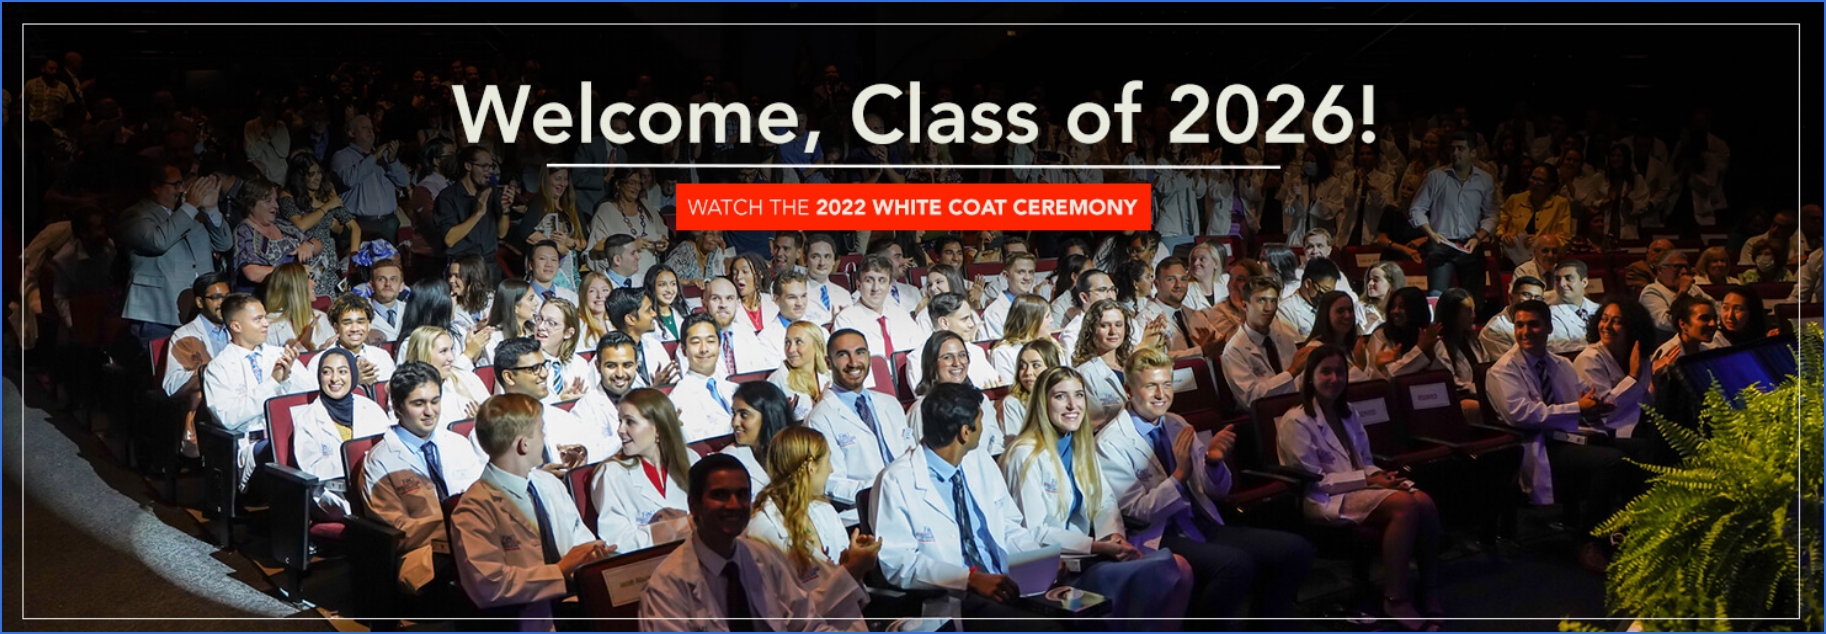 Welcome, Class of 2026! Watch the 2022 White Coat Ceremony